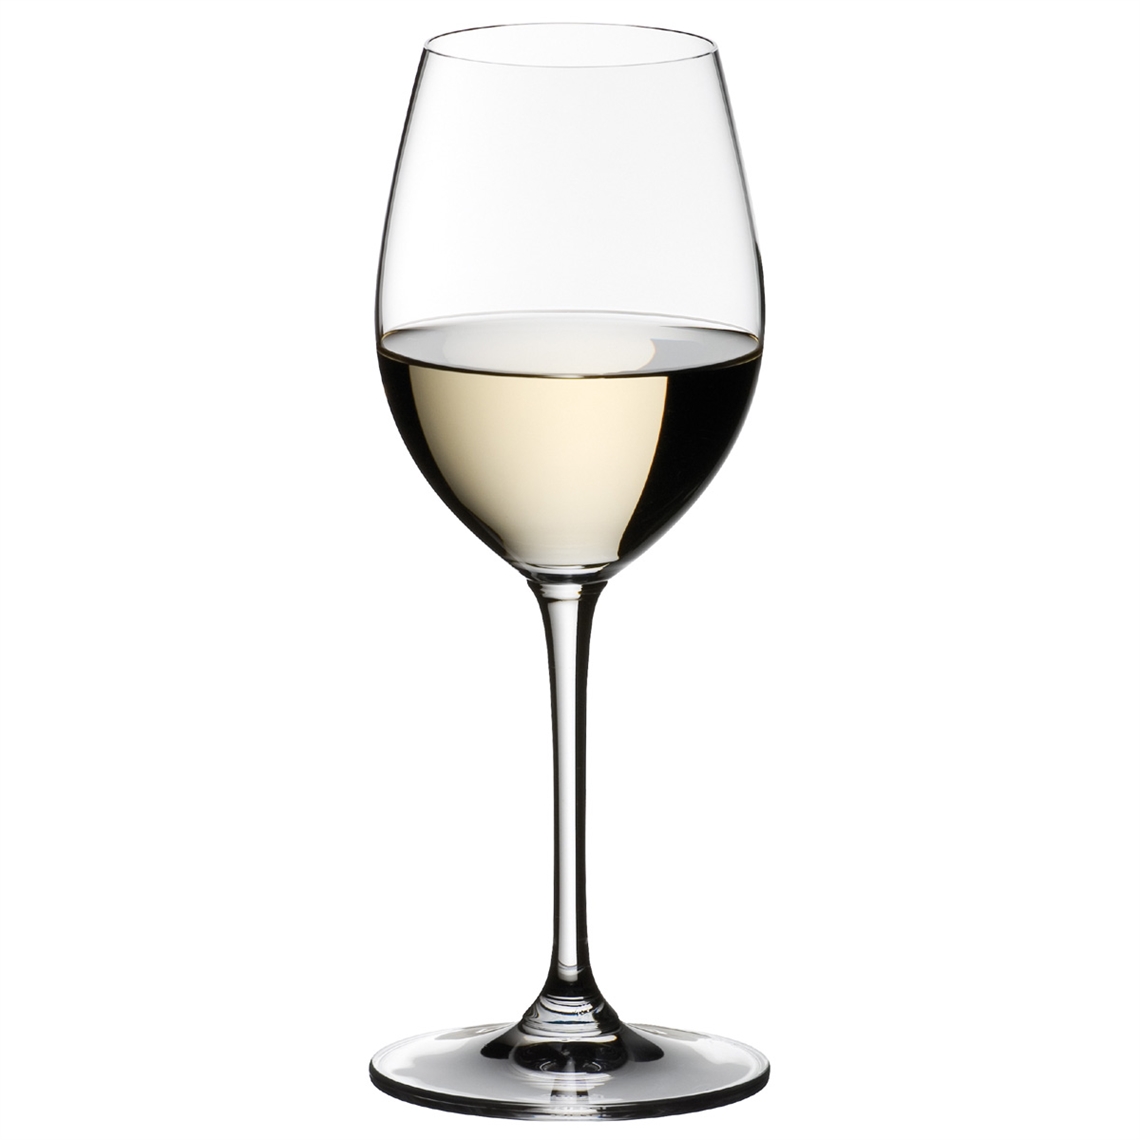 View more fortissimo from our Dessert Wine Glasses range